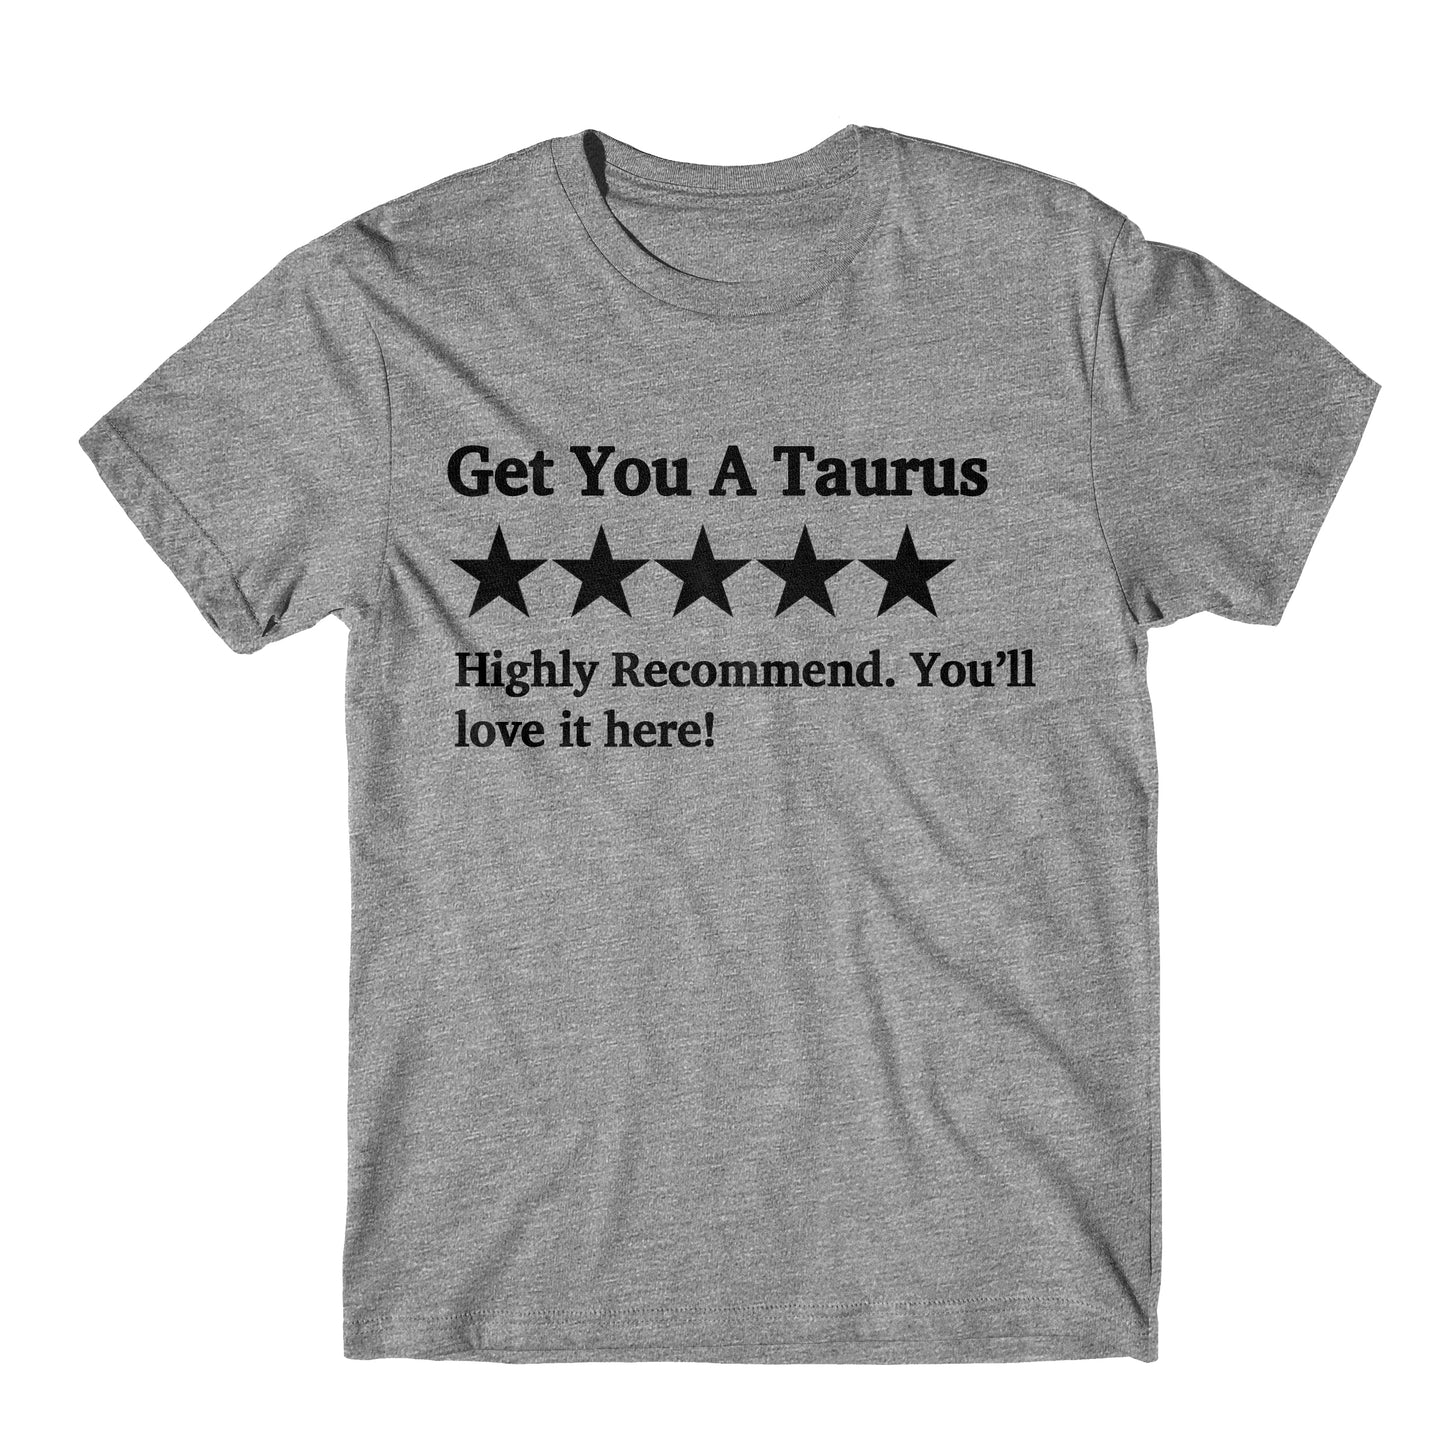 "Get You A Taurus Five Star Rating" Tee